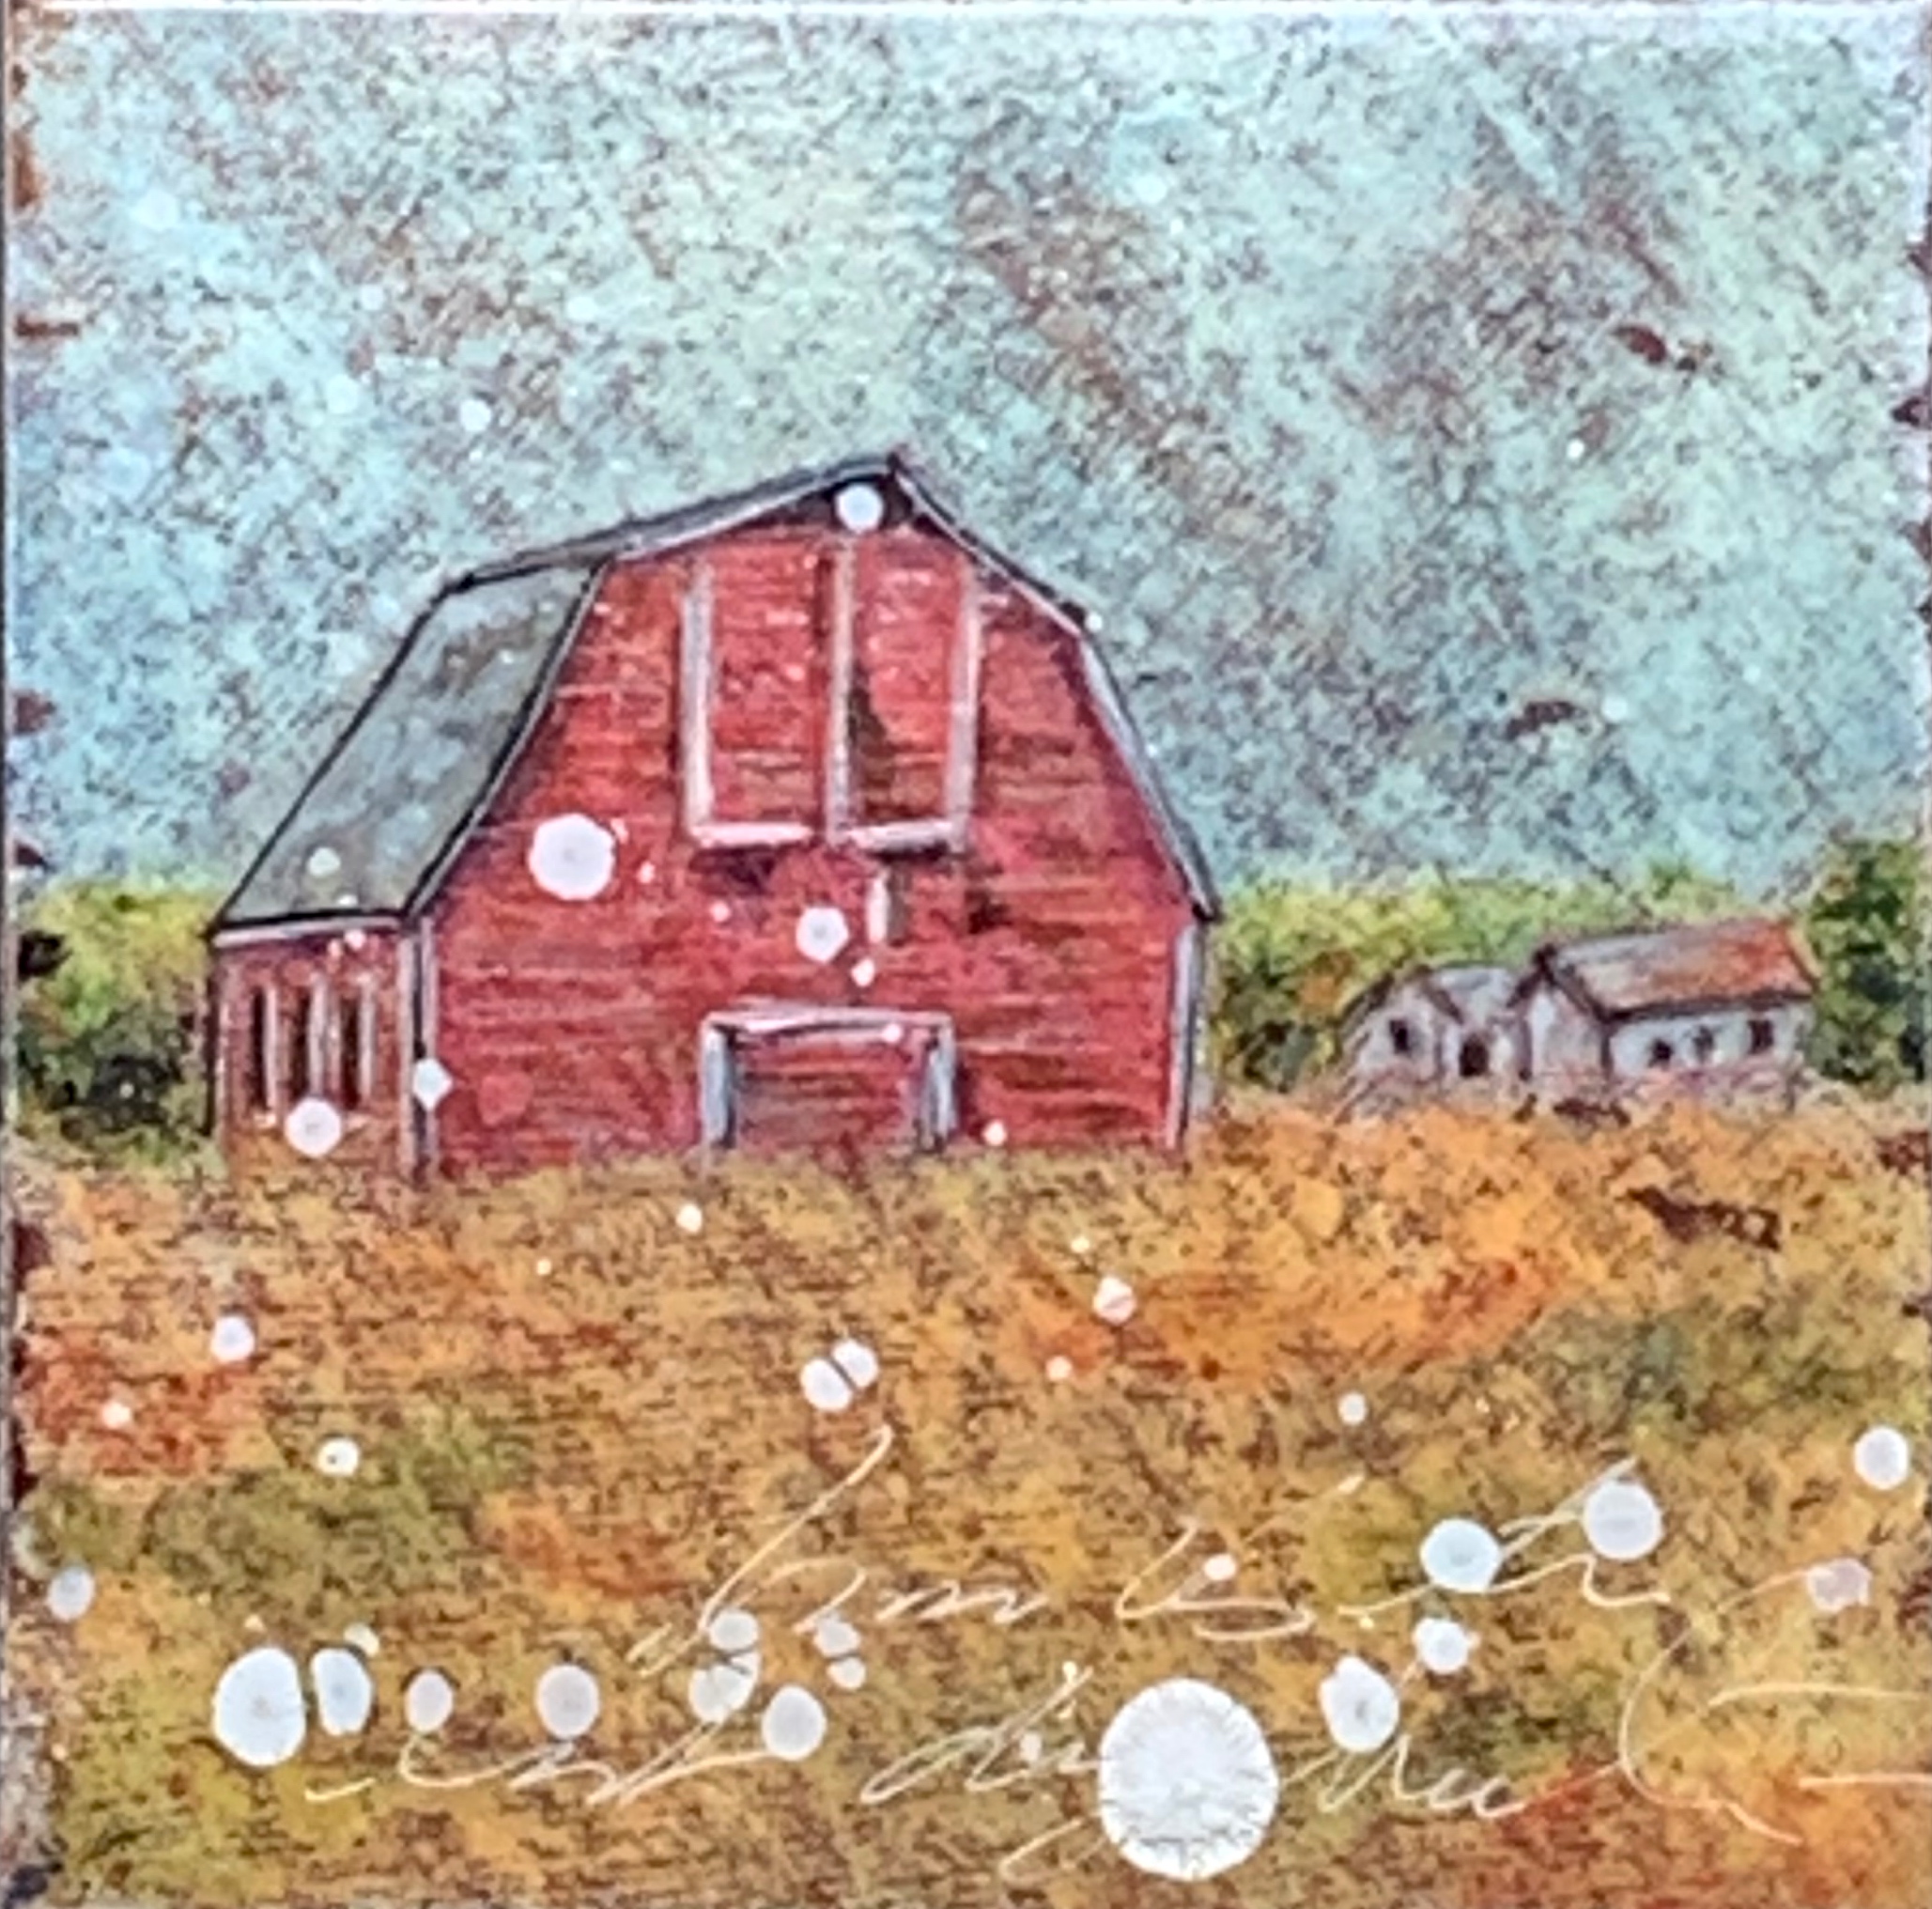 Where the Little Children Played, mixed media barn painting by Sonya Iwasiuk | Effusion Art Gallery + Cast Glass Studio, Invermere BC